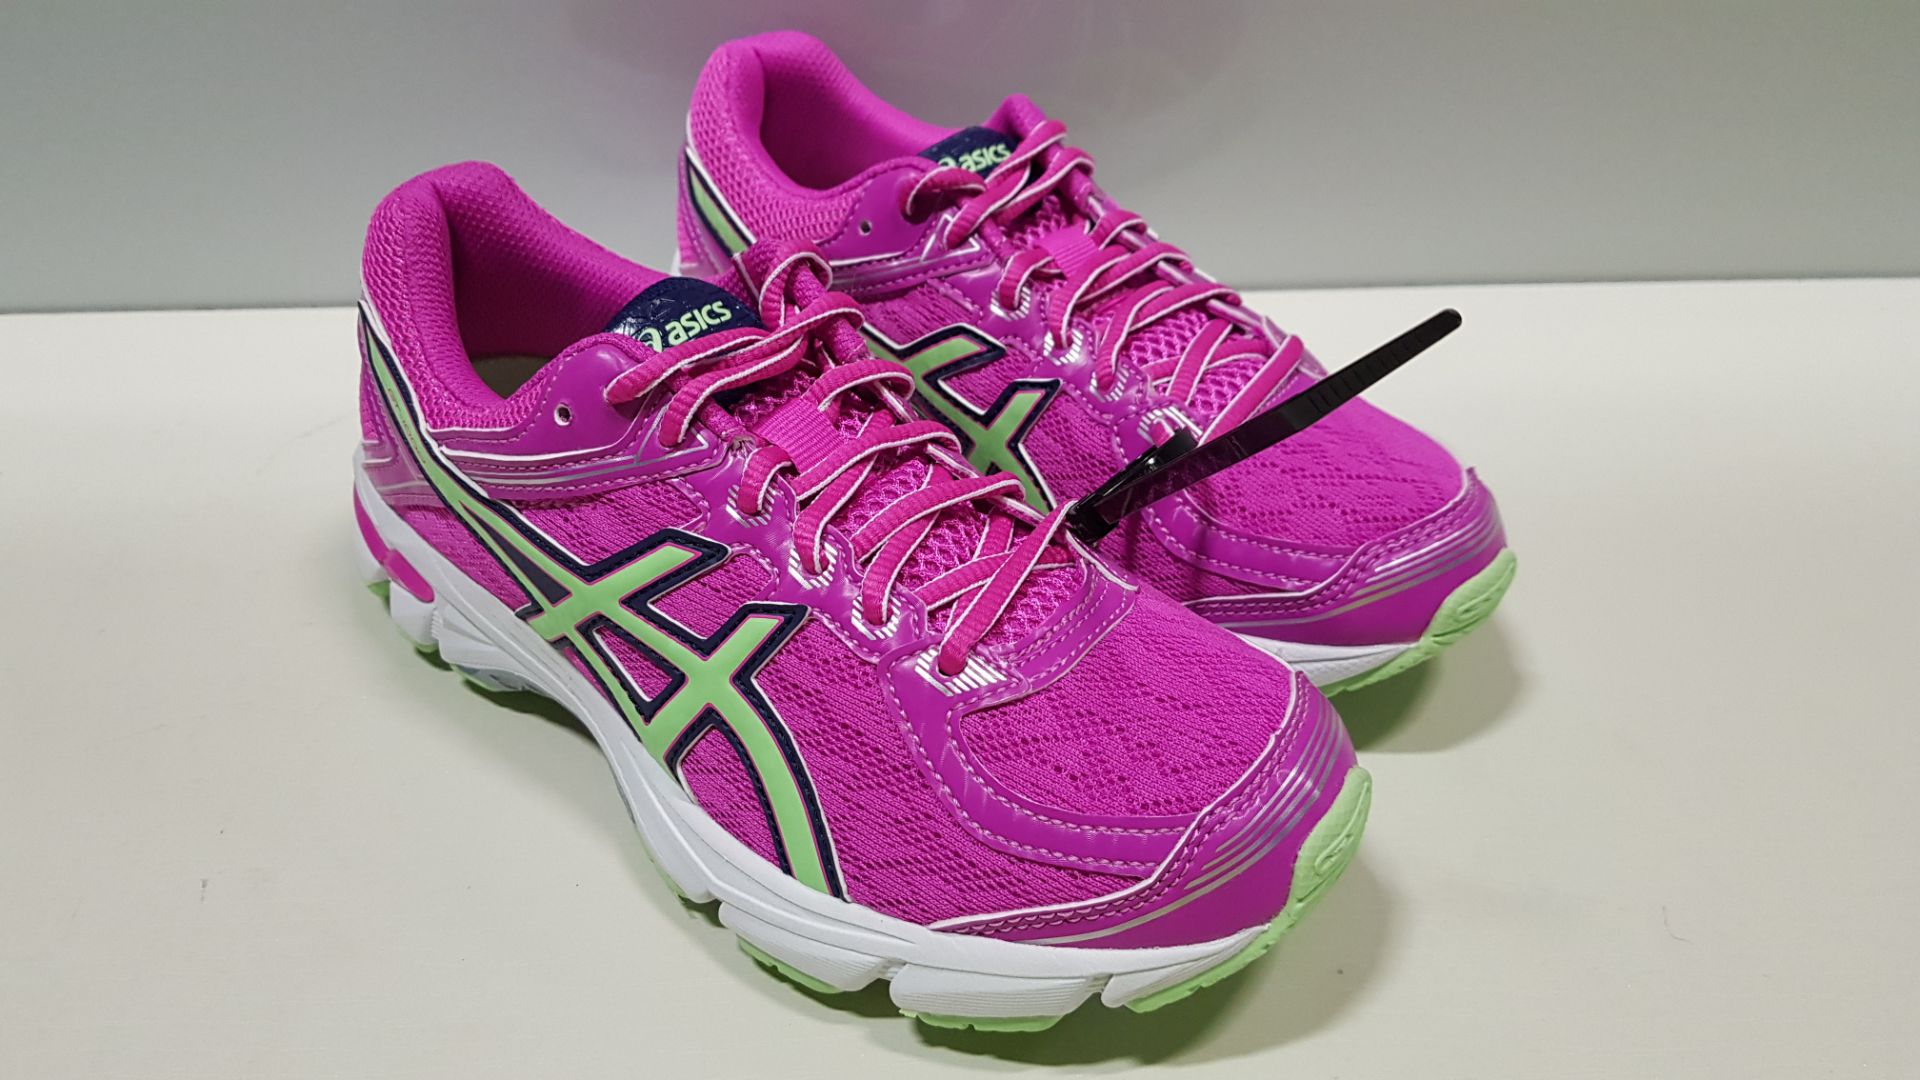 12 X BRAND NEW WOMENS ASICS GT 1000 GEL RUNNING SHOES US SIZE 4